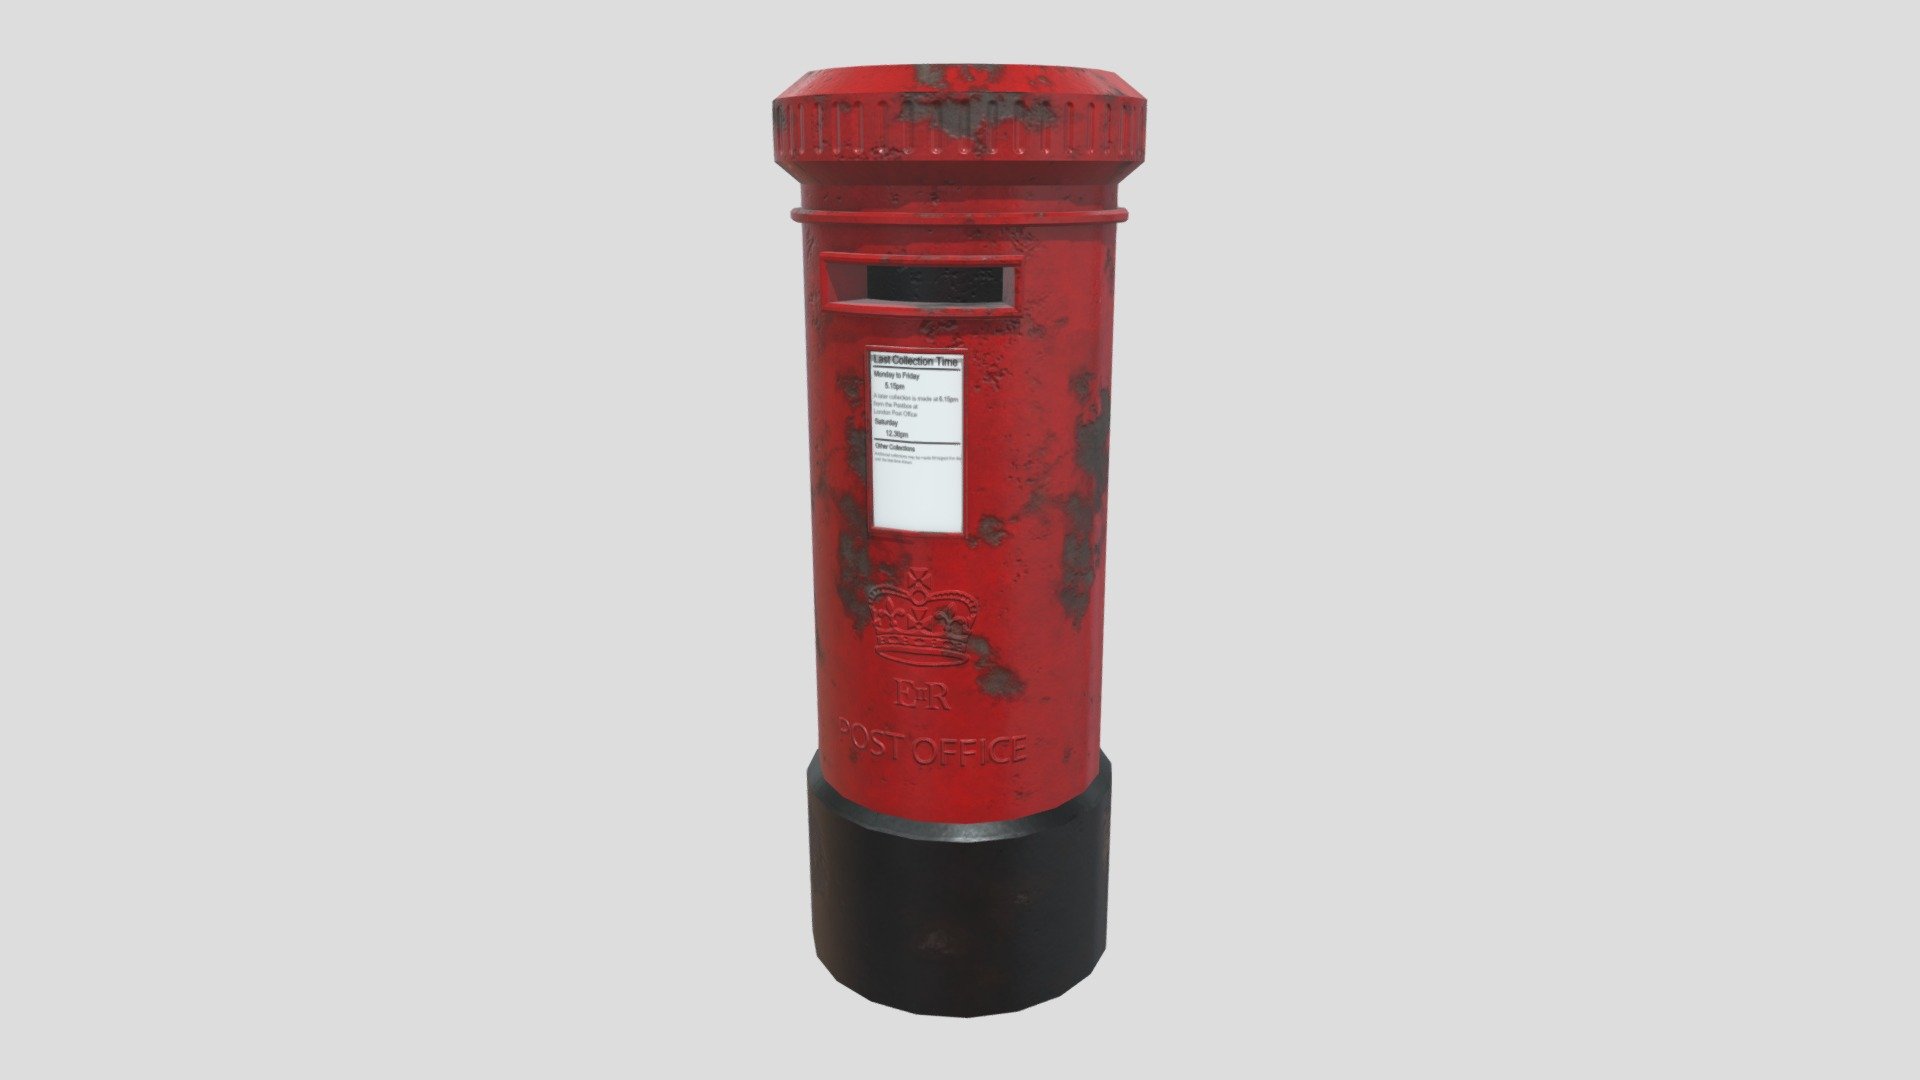 Model of the Red Post Box commonly found in the UK - Red Post Box - Download Free 3D model by Faheem Yusuf (@FameProductions) 3d model